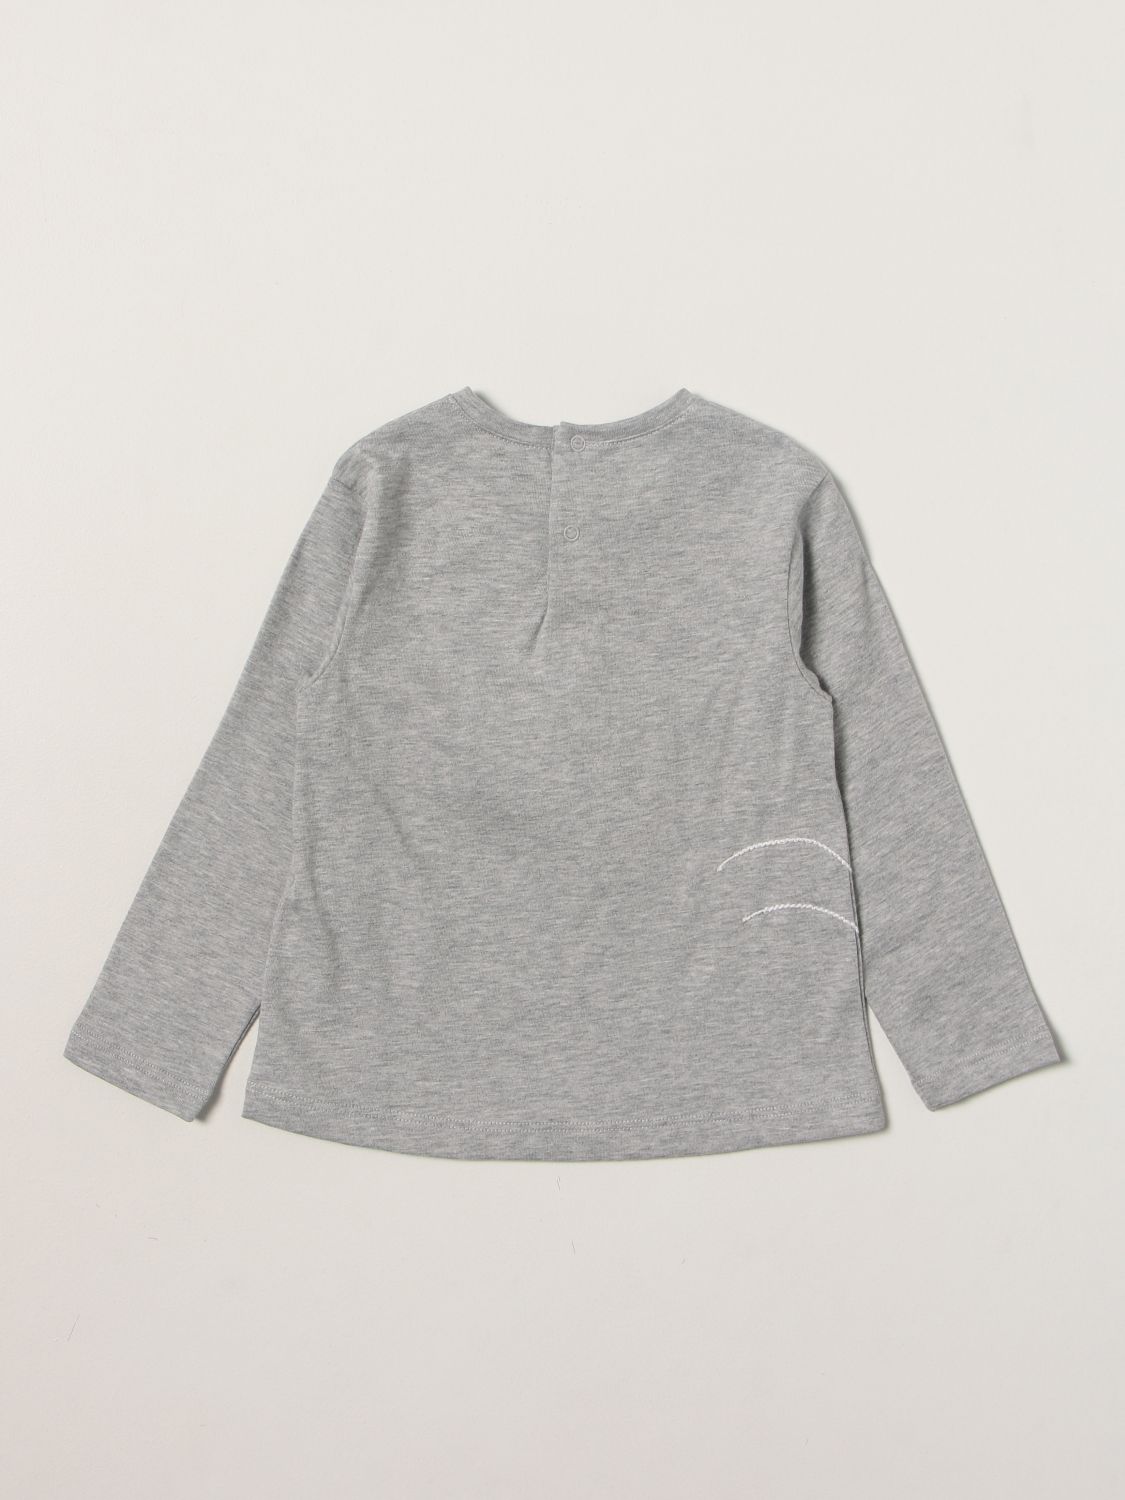 T-shirt Il Gufo: Il Gufo T-shirt in cotton with tulle application grey 2